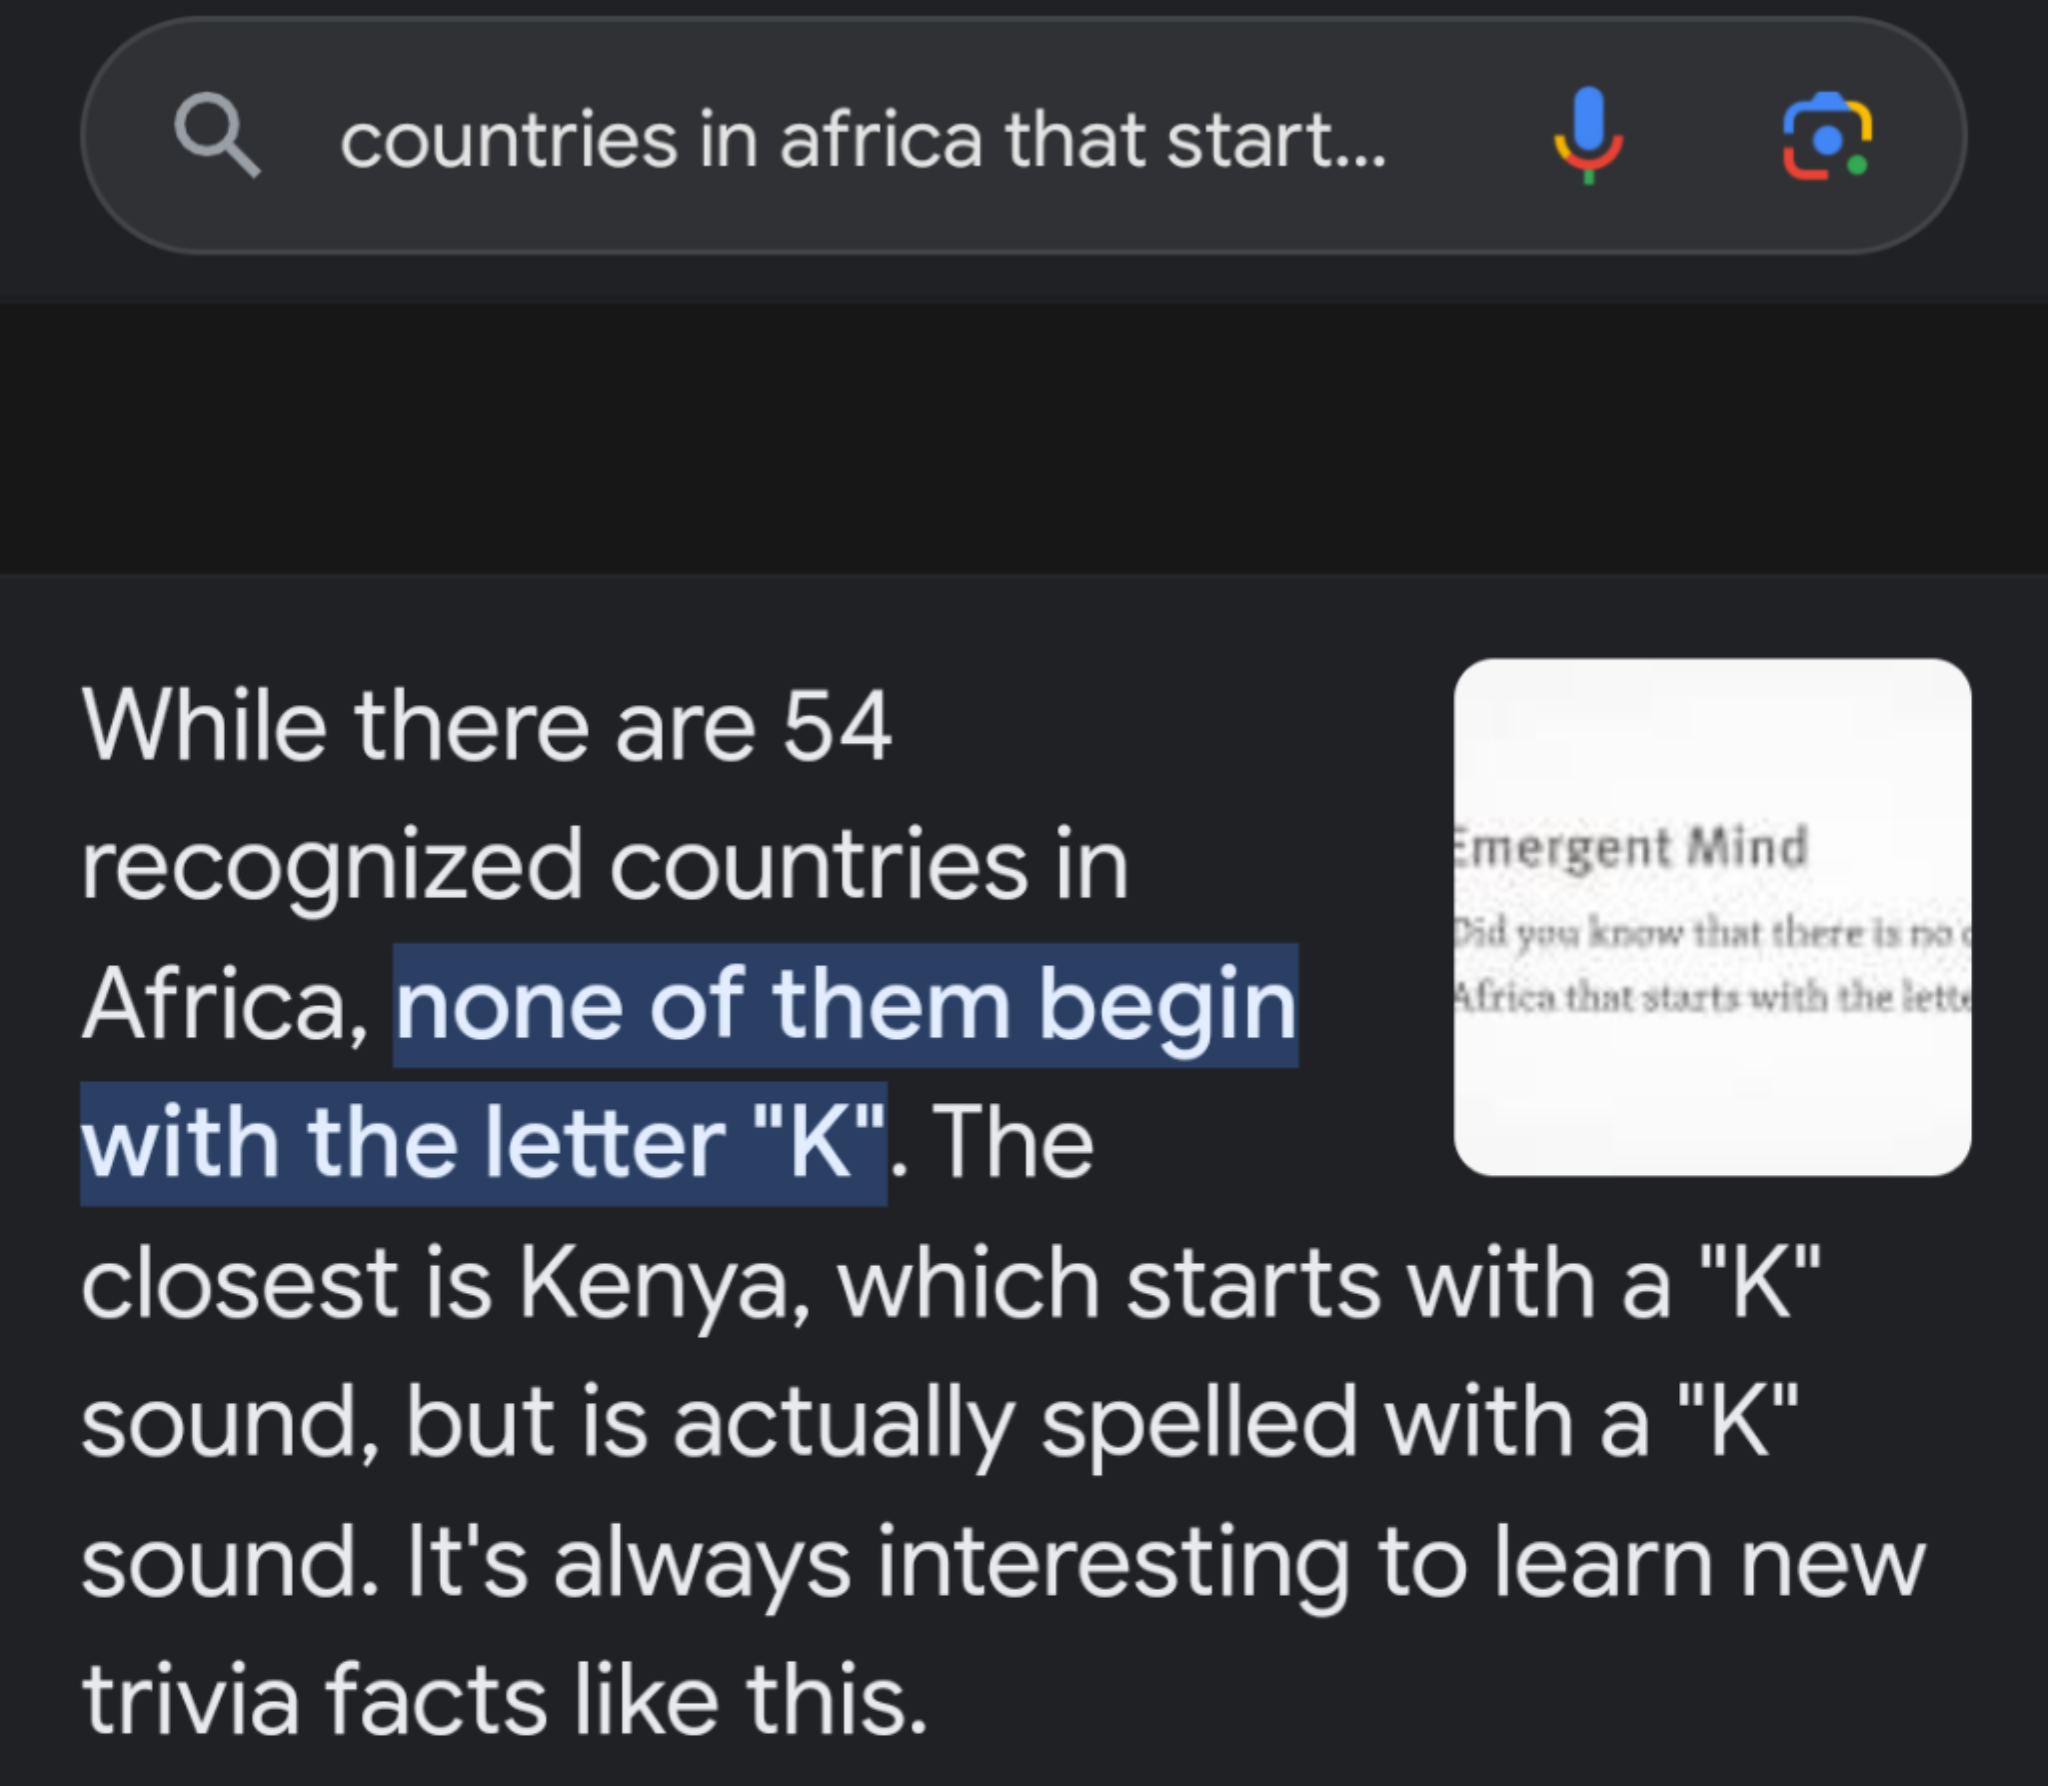 a screenshot of a Google inquiry asking if any countries in Africa start with the letter K, with an inaccurate response saying that Kenya "starts with a K sound, but is spelled with a K sound." 